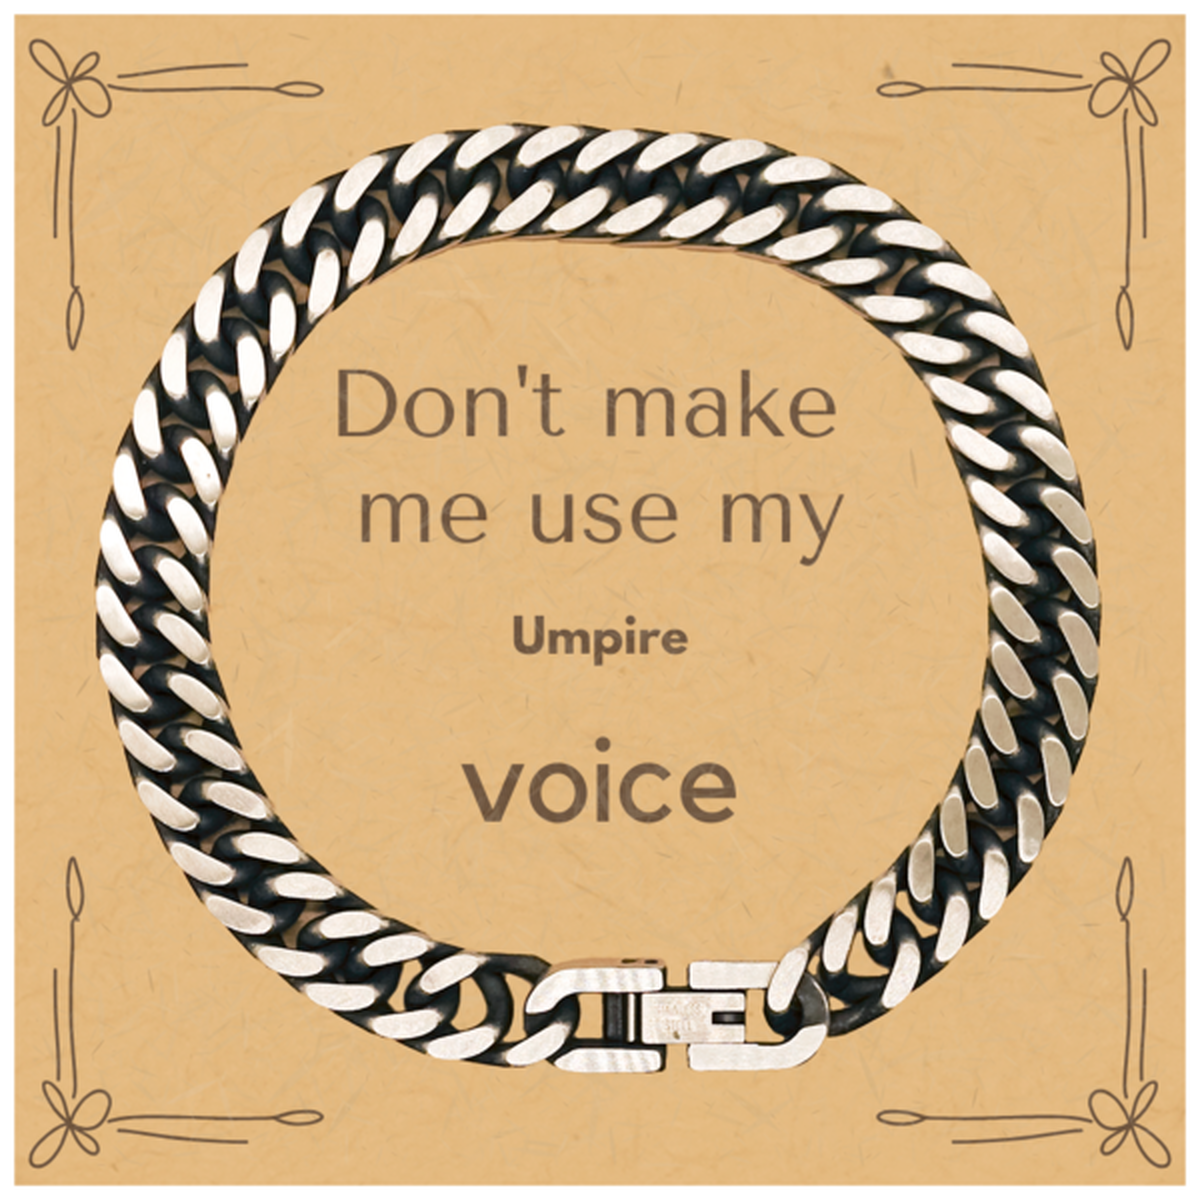 Don't make me use my Umpire voice, Sarcasm Umpire Card Gifts, Christmas Umpire Cuban Link Chain Bracelet Birthday Unique Gifts For Umpire Coworkers, Men, Women, Colleague, Friends